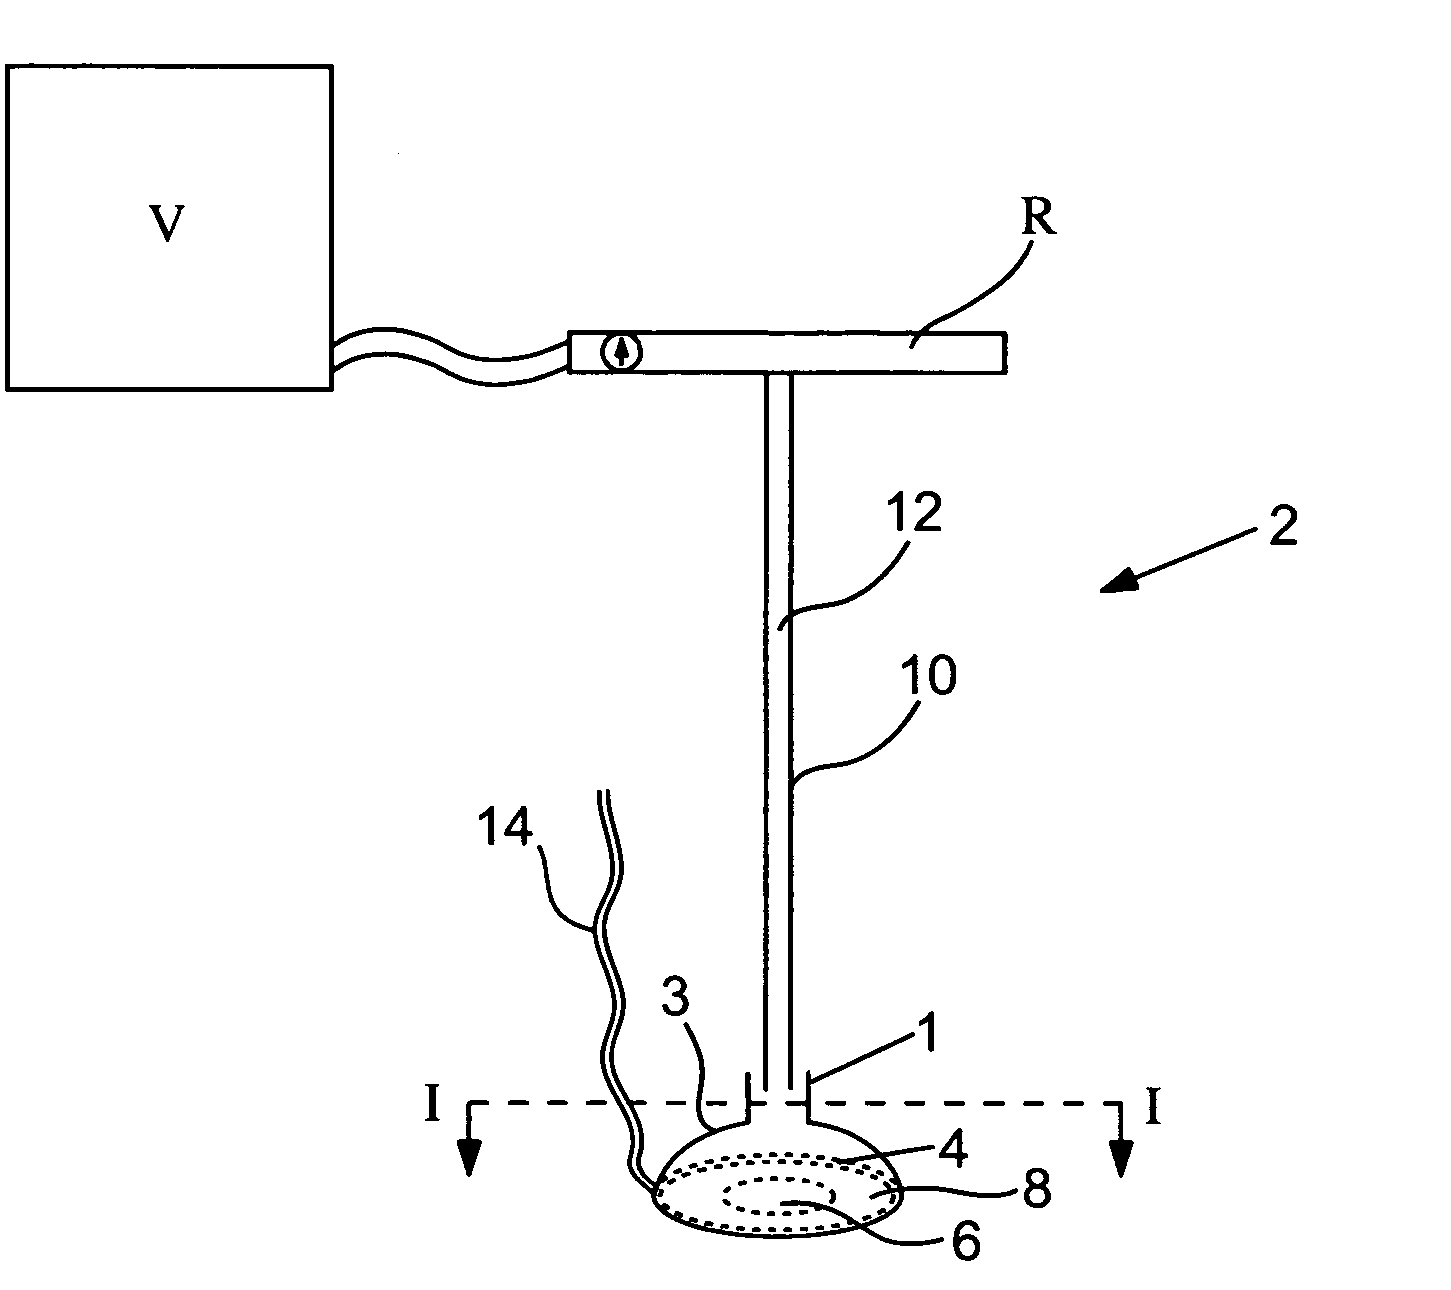 Organ manipulator and positioner and methods of using the same